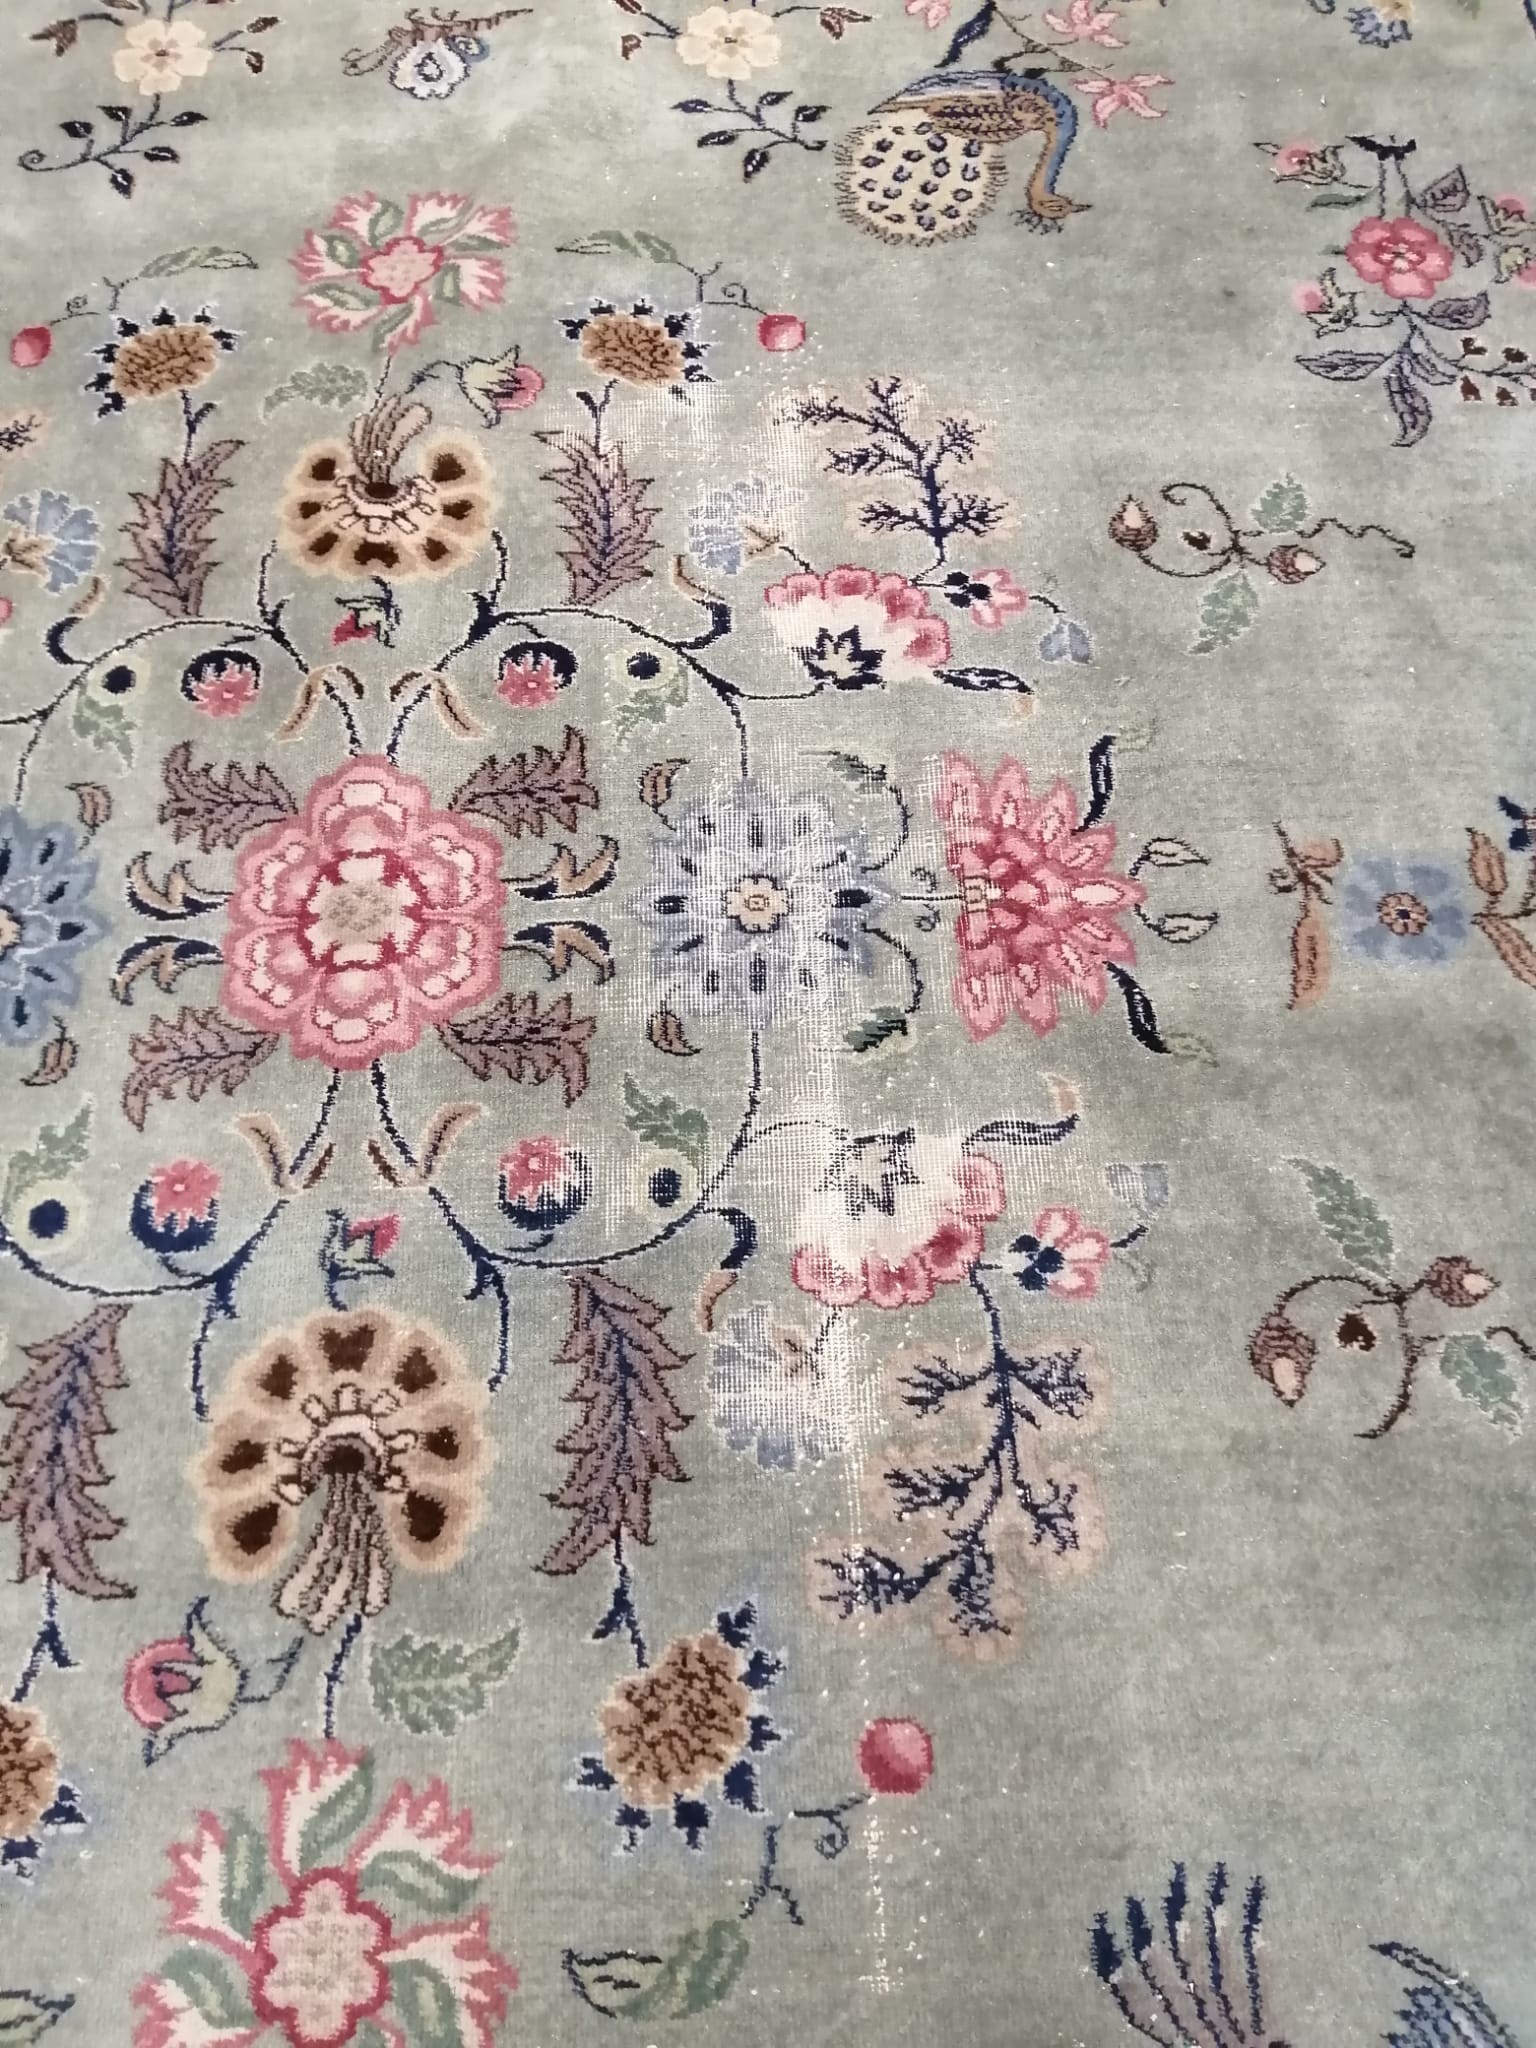 A Chinese Celadon ground floral blue ground carpet, approx. 544 x 366cm